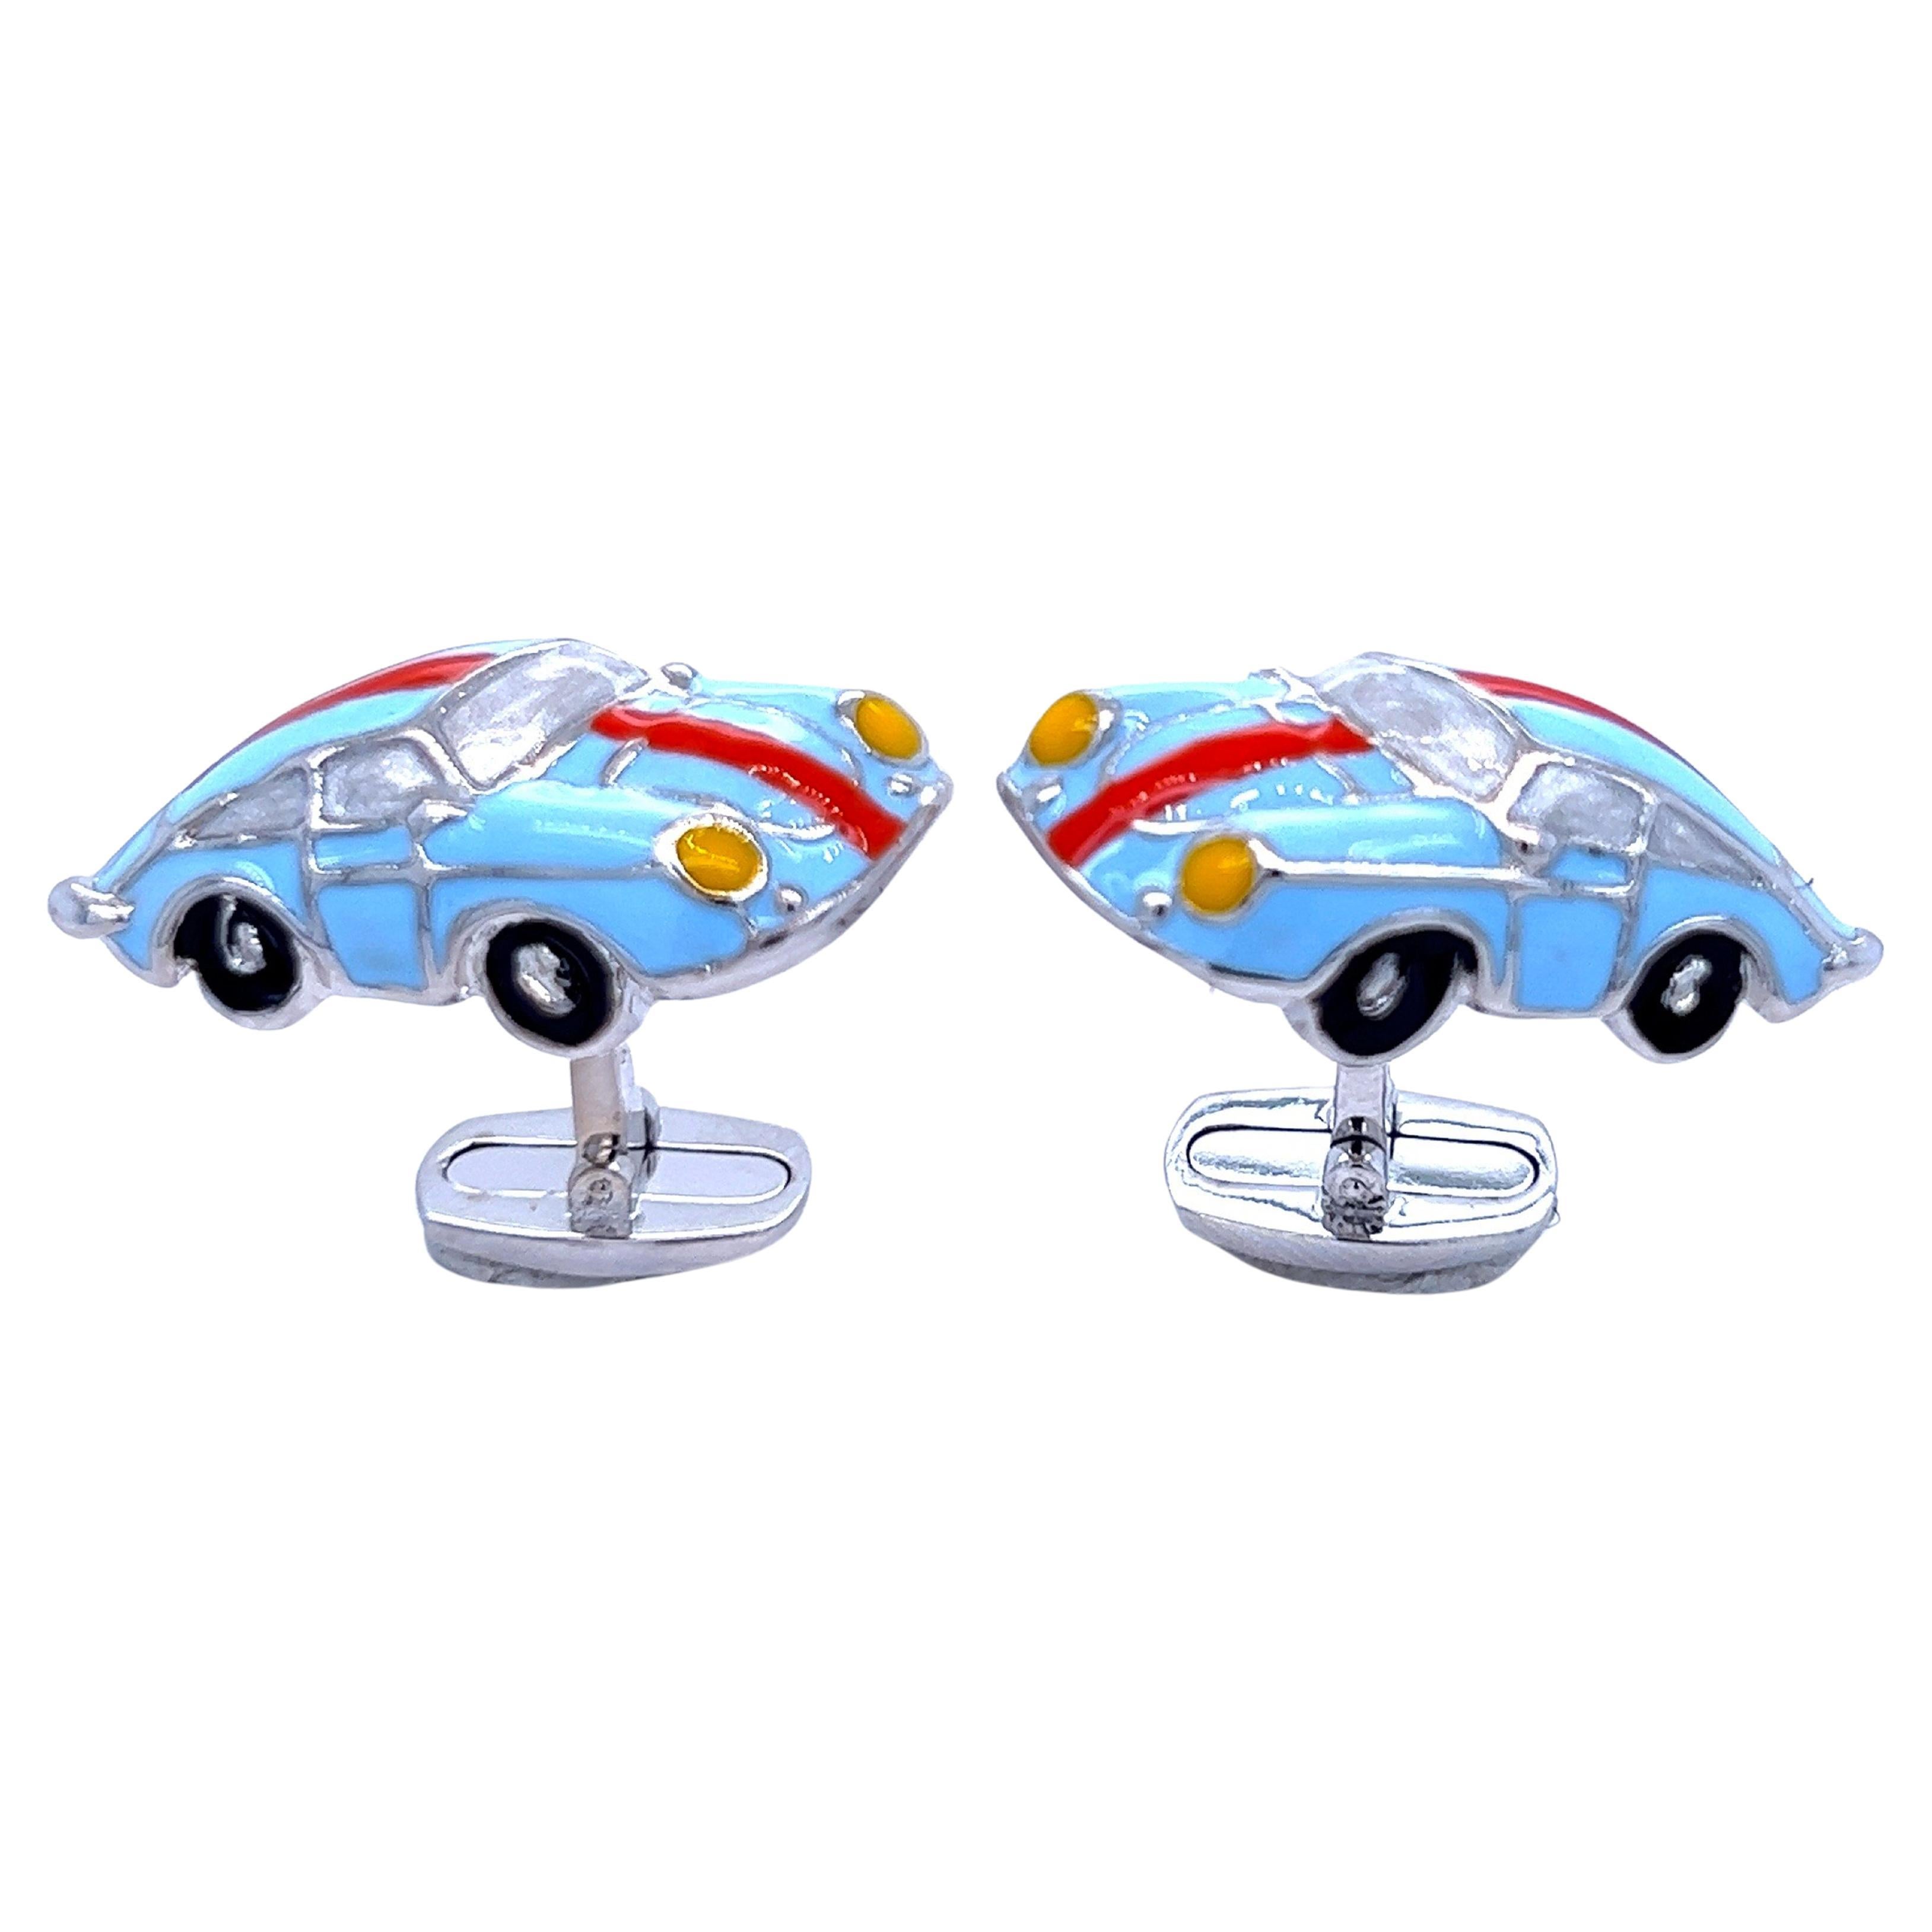 Berca Le Man Racing Color 911 Porsche Shaped Enameled Sterling Silver Cufflinks